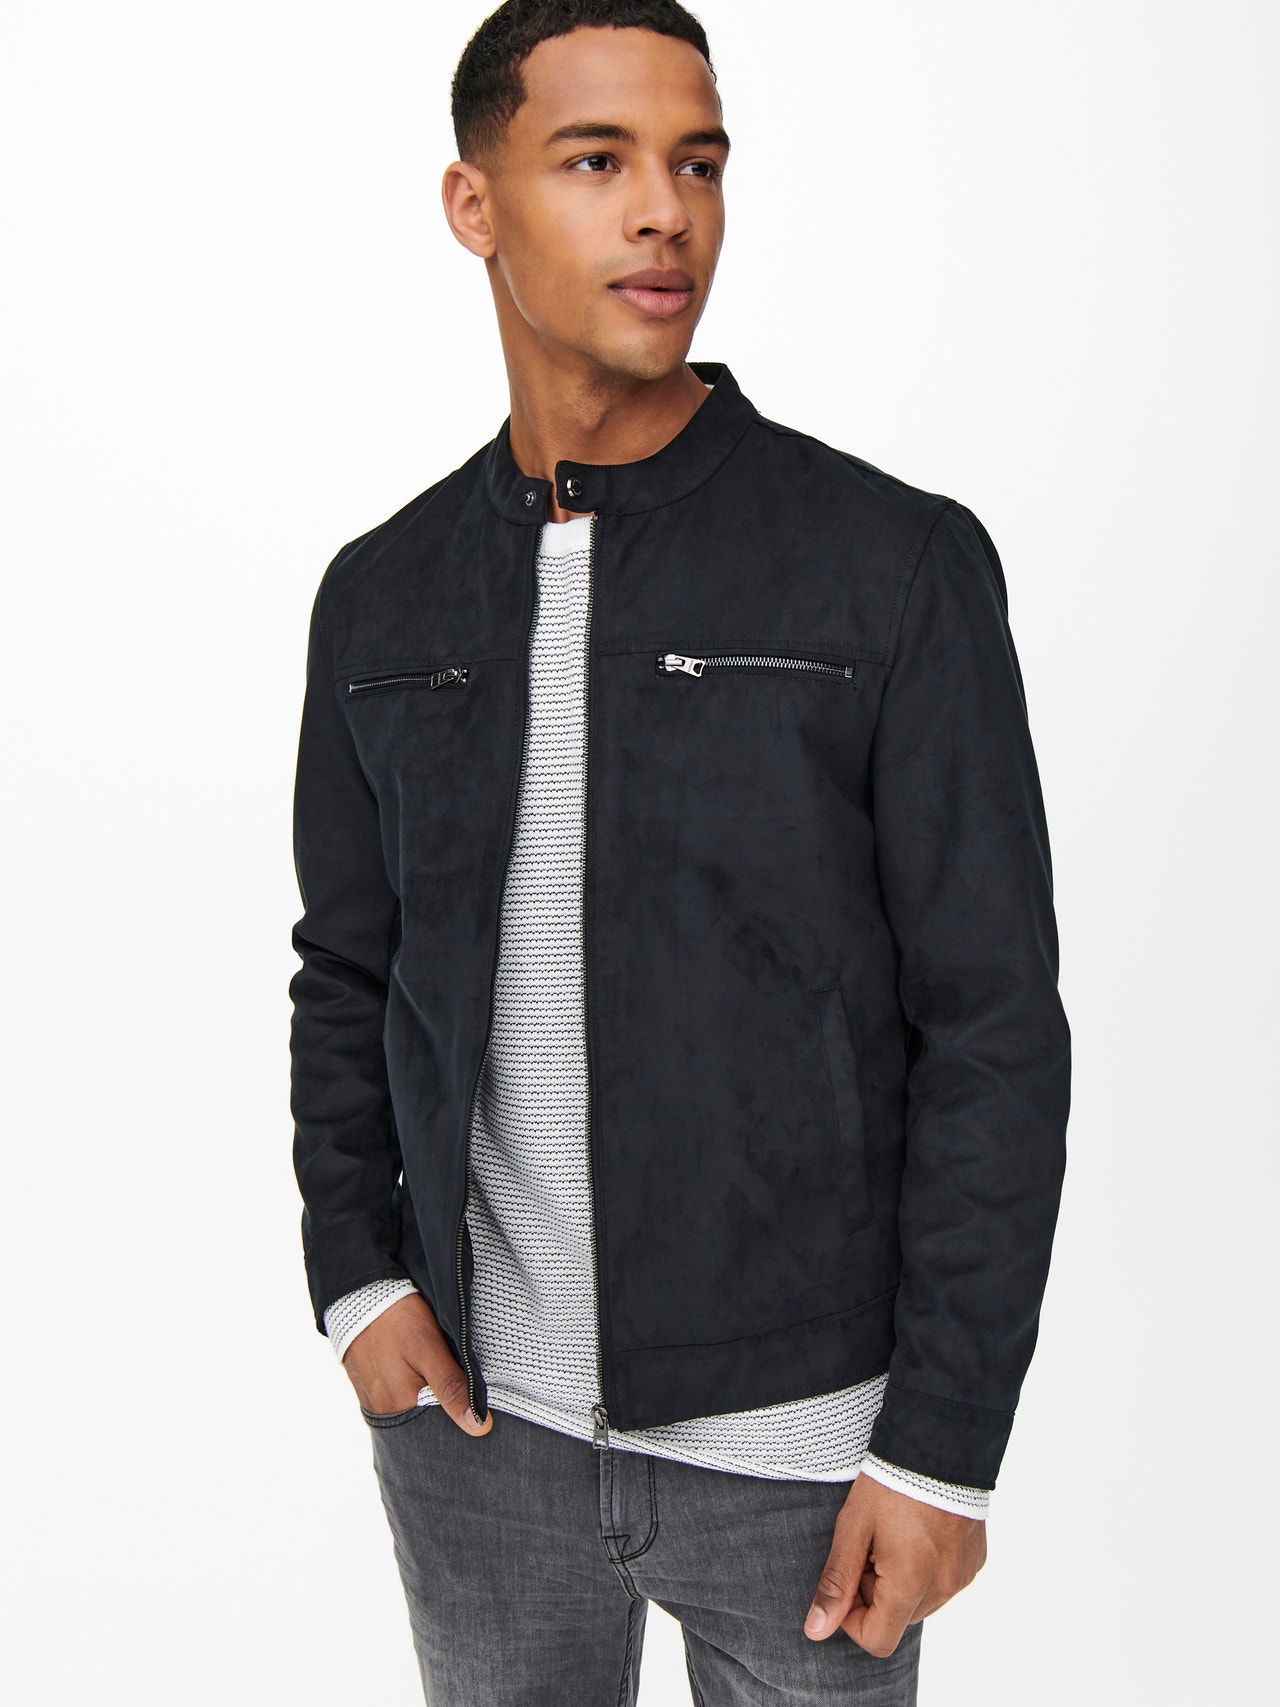 ONLY & SONS Jacket -Black - 22021446